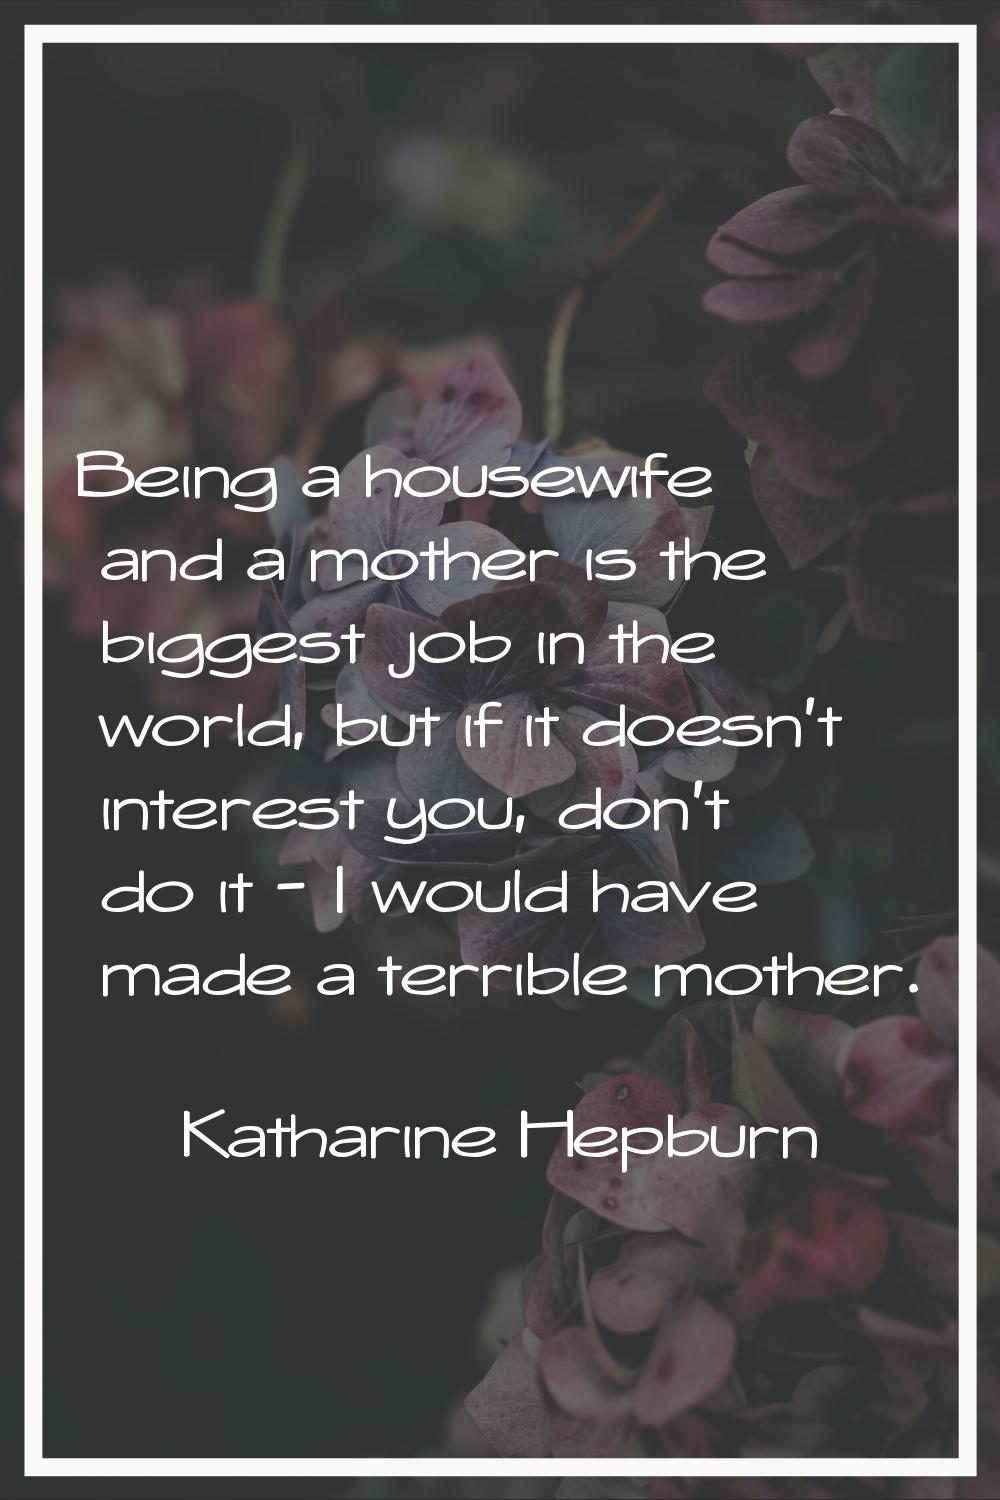 Being a housewife and a mother is the biggest job in the world, but if it doesn't interest you, don